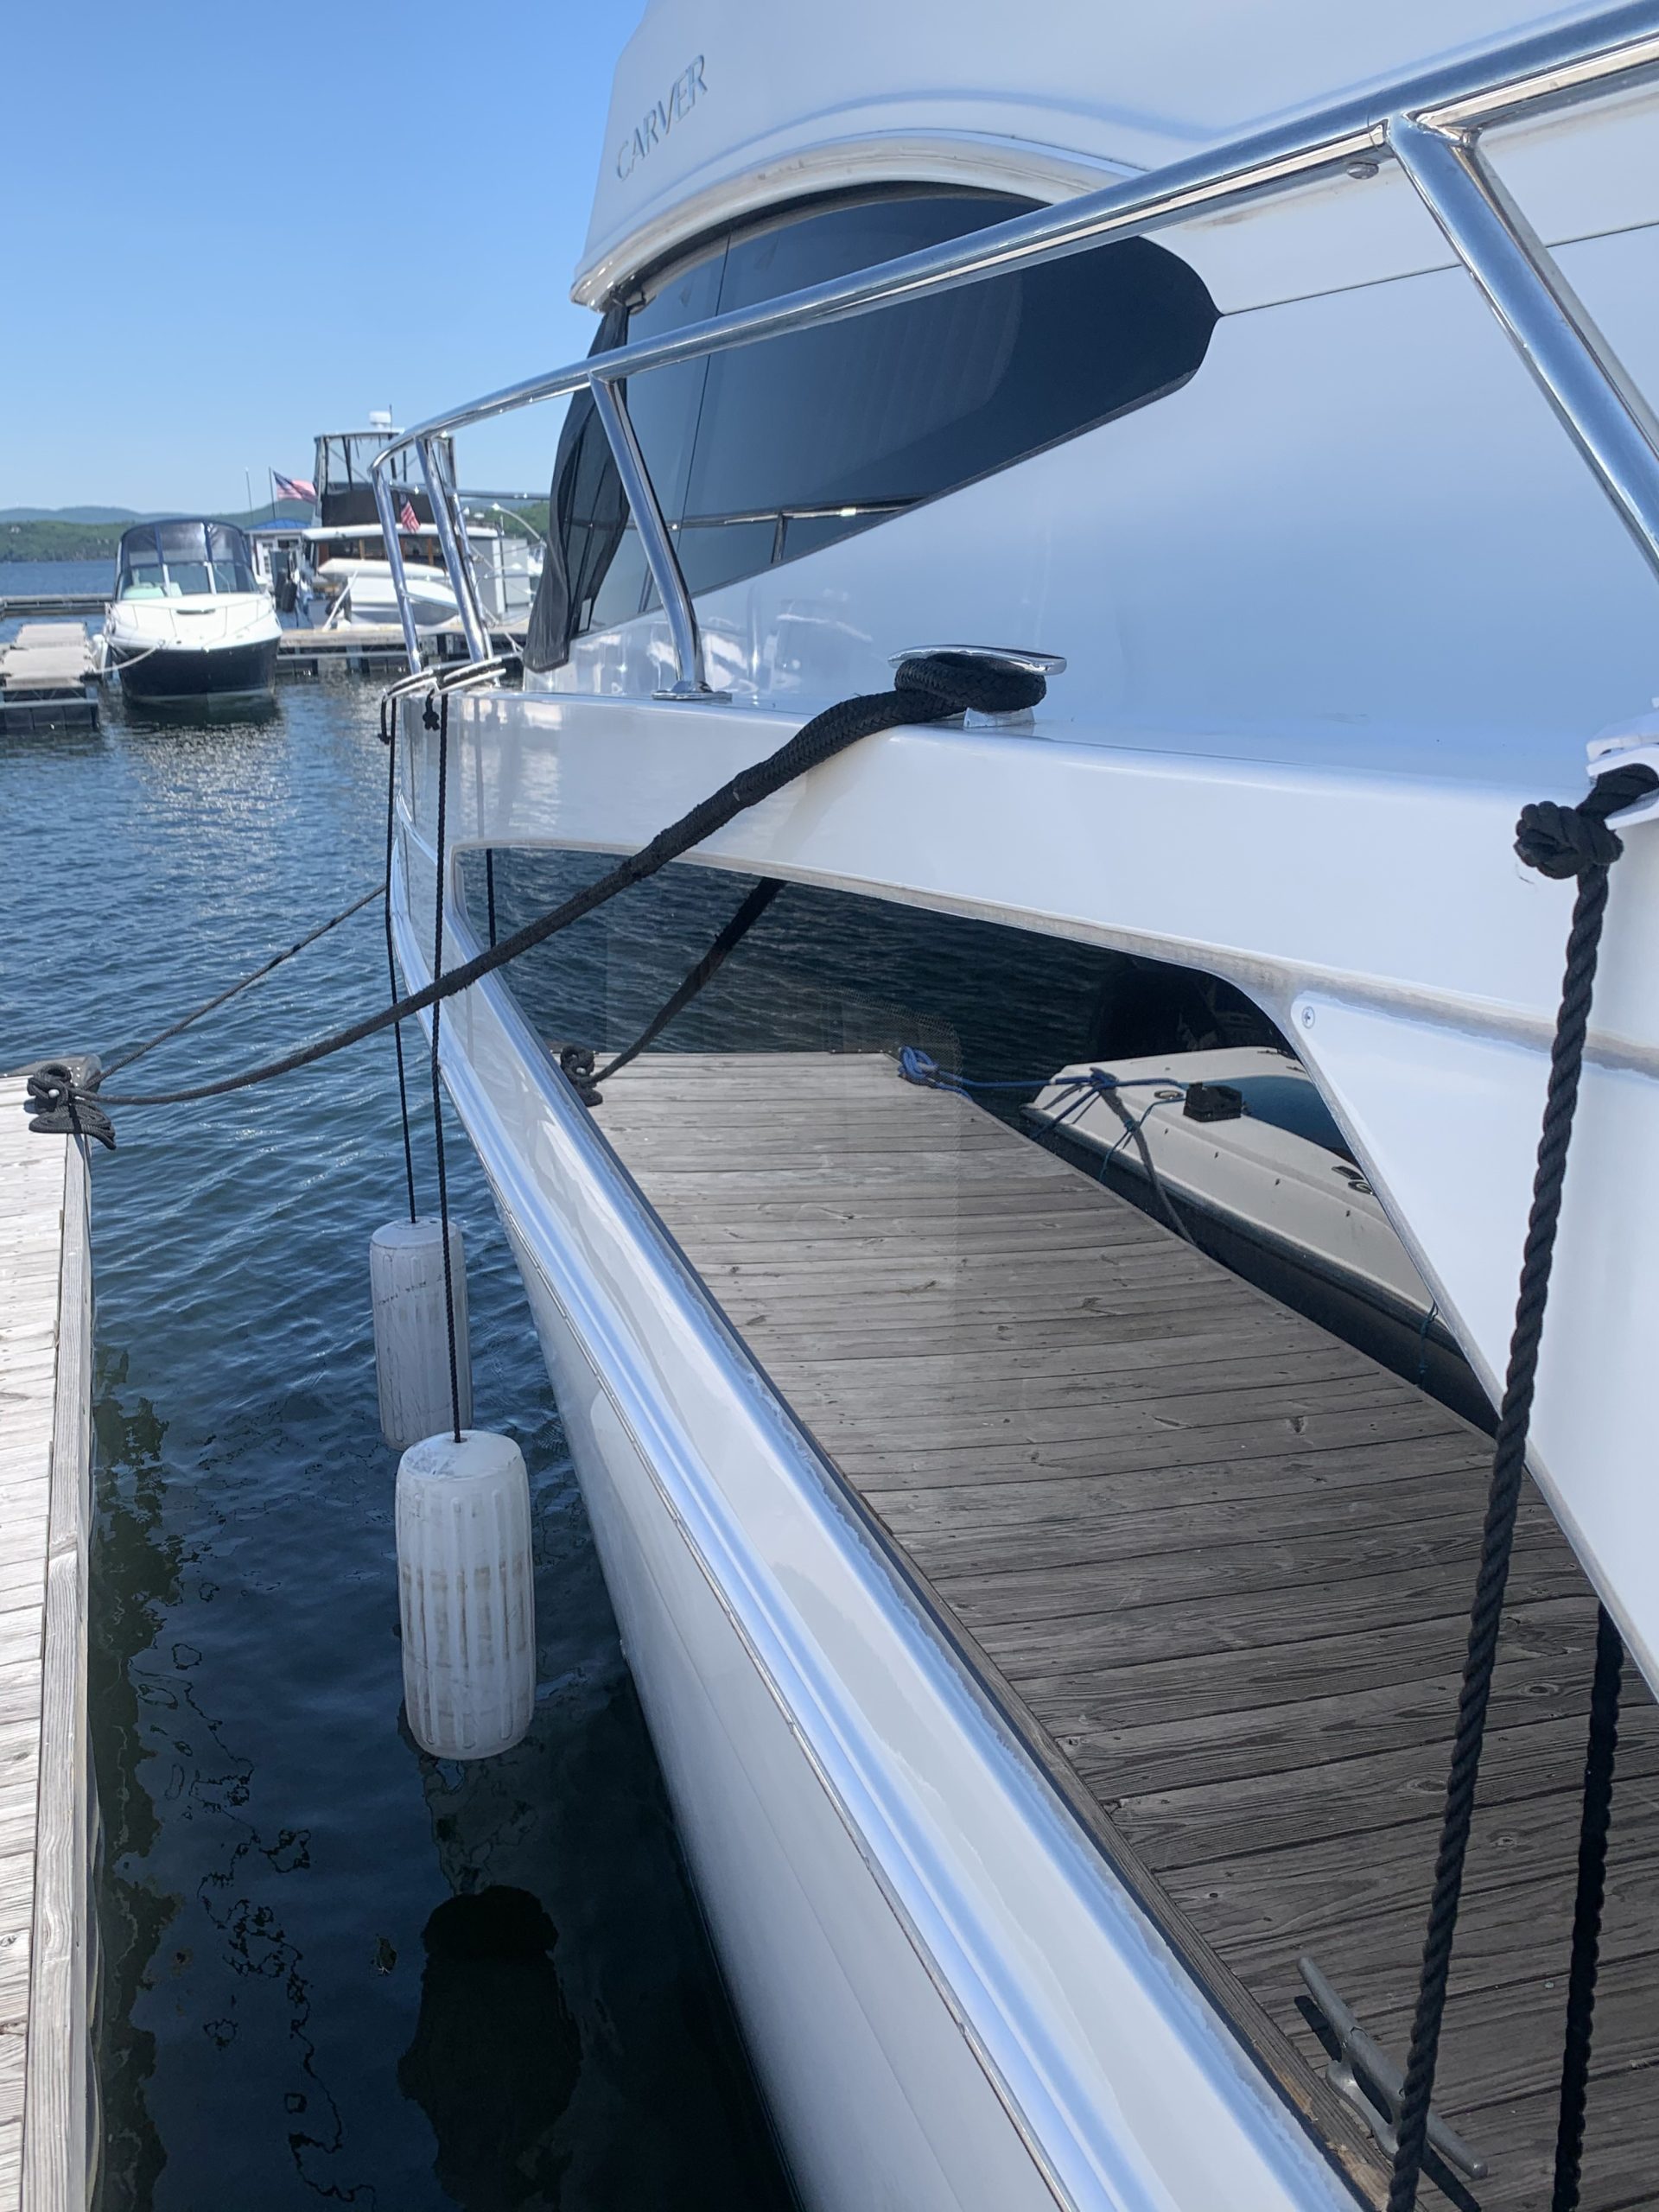 Boat cleaning